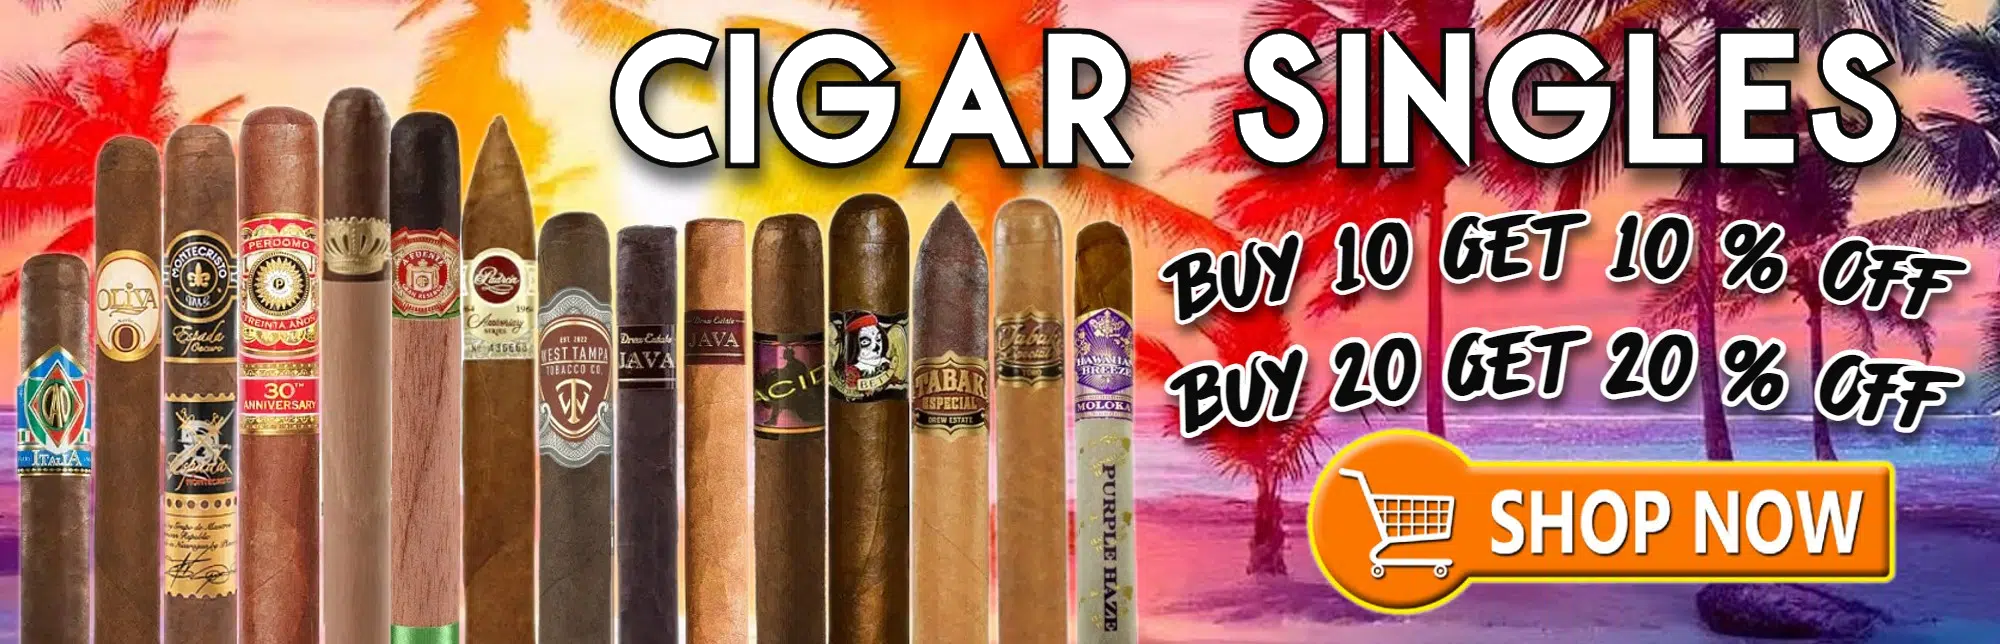 Best Single Cigars For Sale